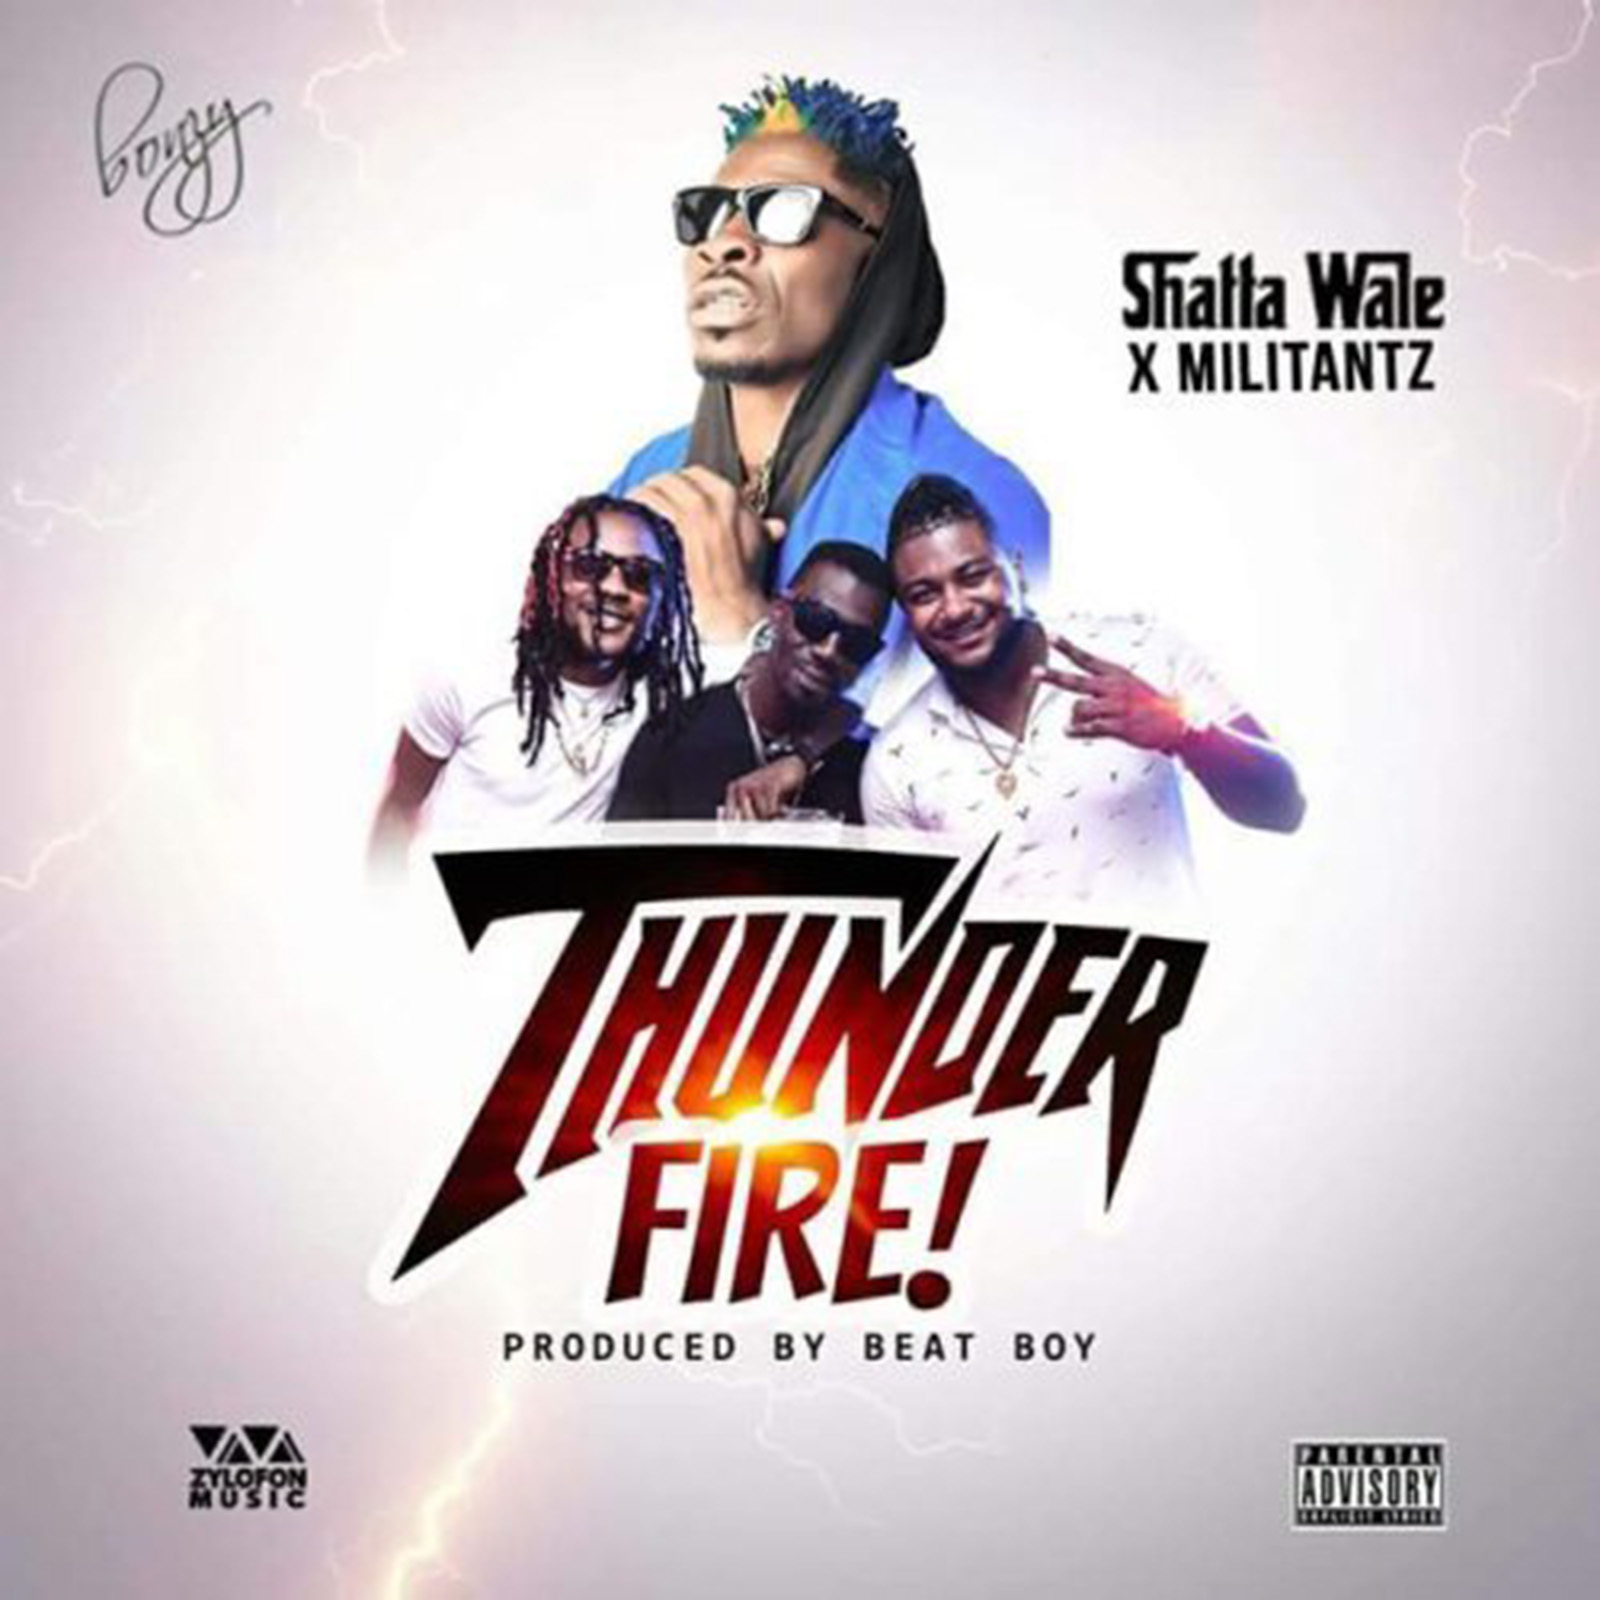 Thunder Fire by Shatta Wale feat. SM Militants